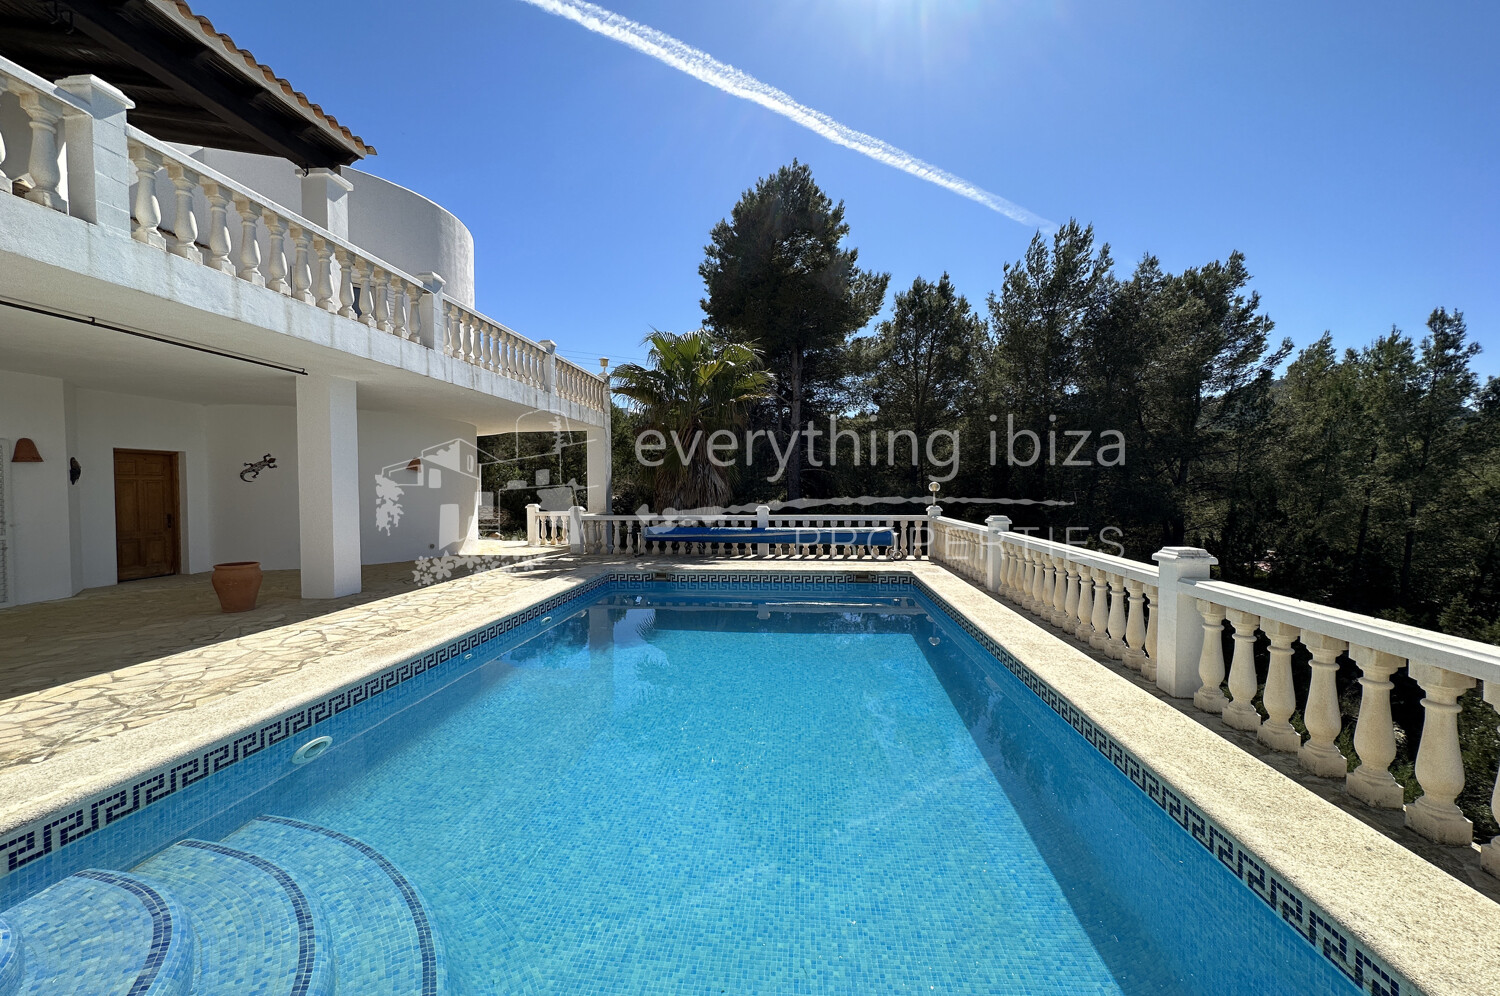 Magnificent Villa in Elevated Position Close to San Jose Village, ref. 1544, for sale in Ibiza by everything ibiza Properties